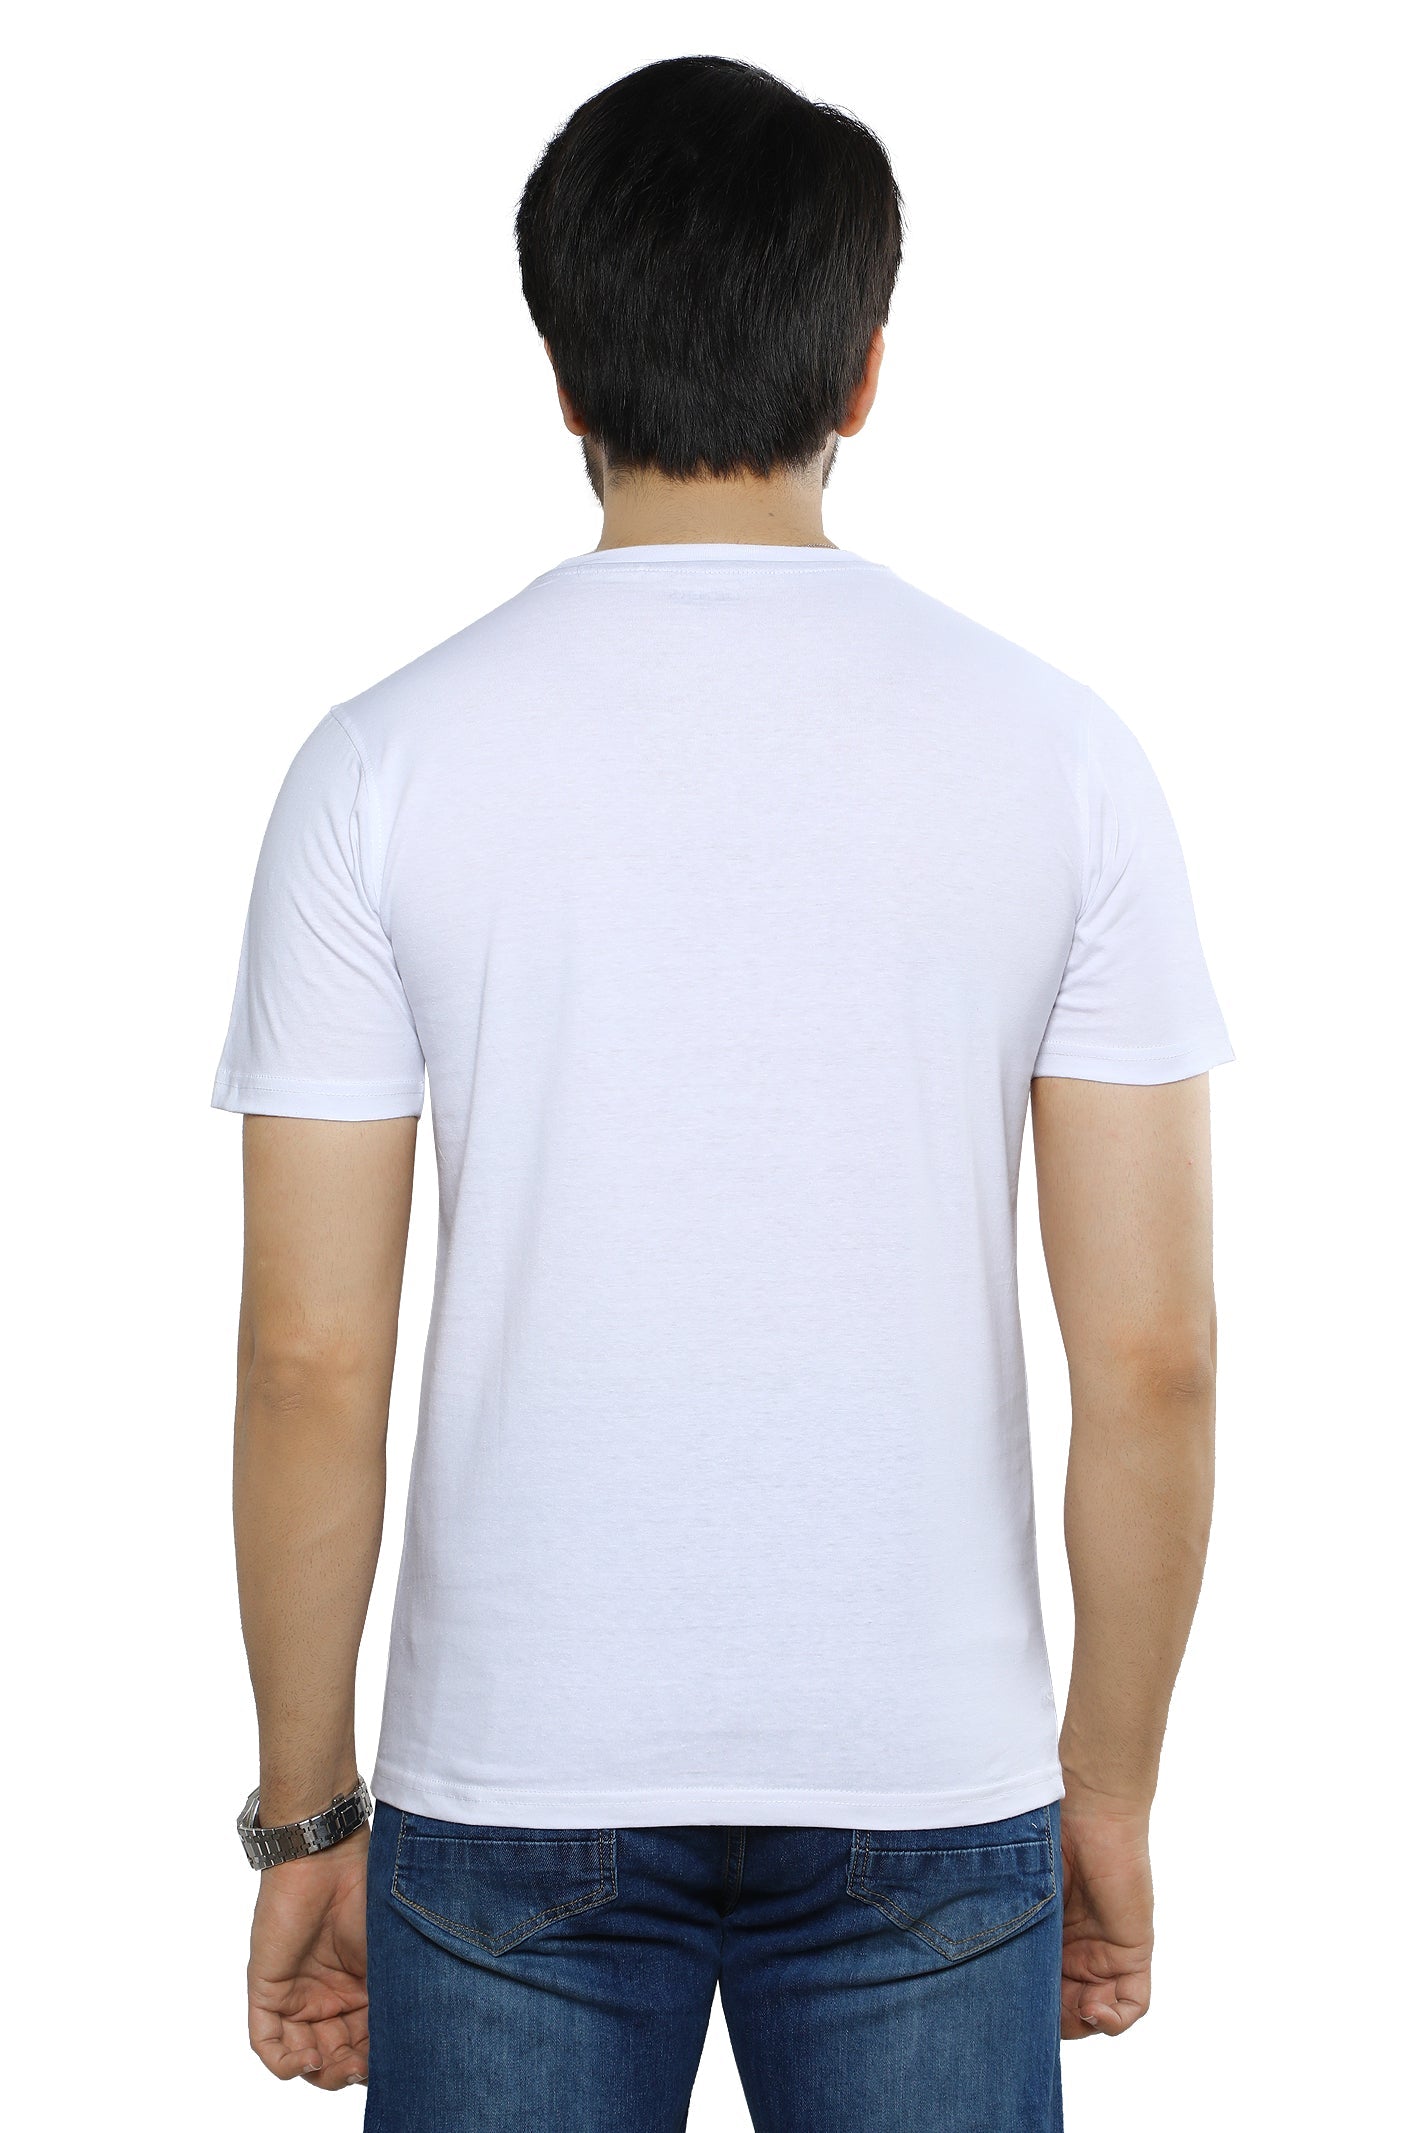 Diners Men's Round Neck T-Shirt SKU: NA869-WHITE - Diners